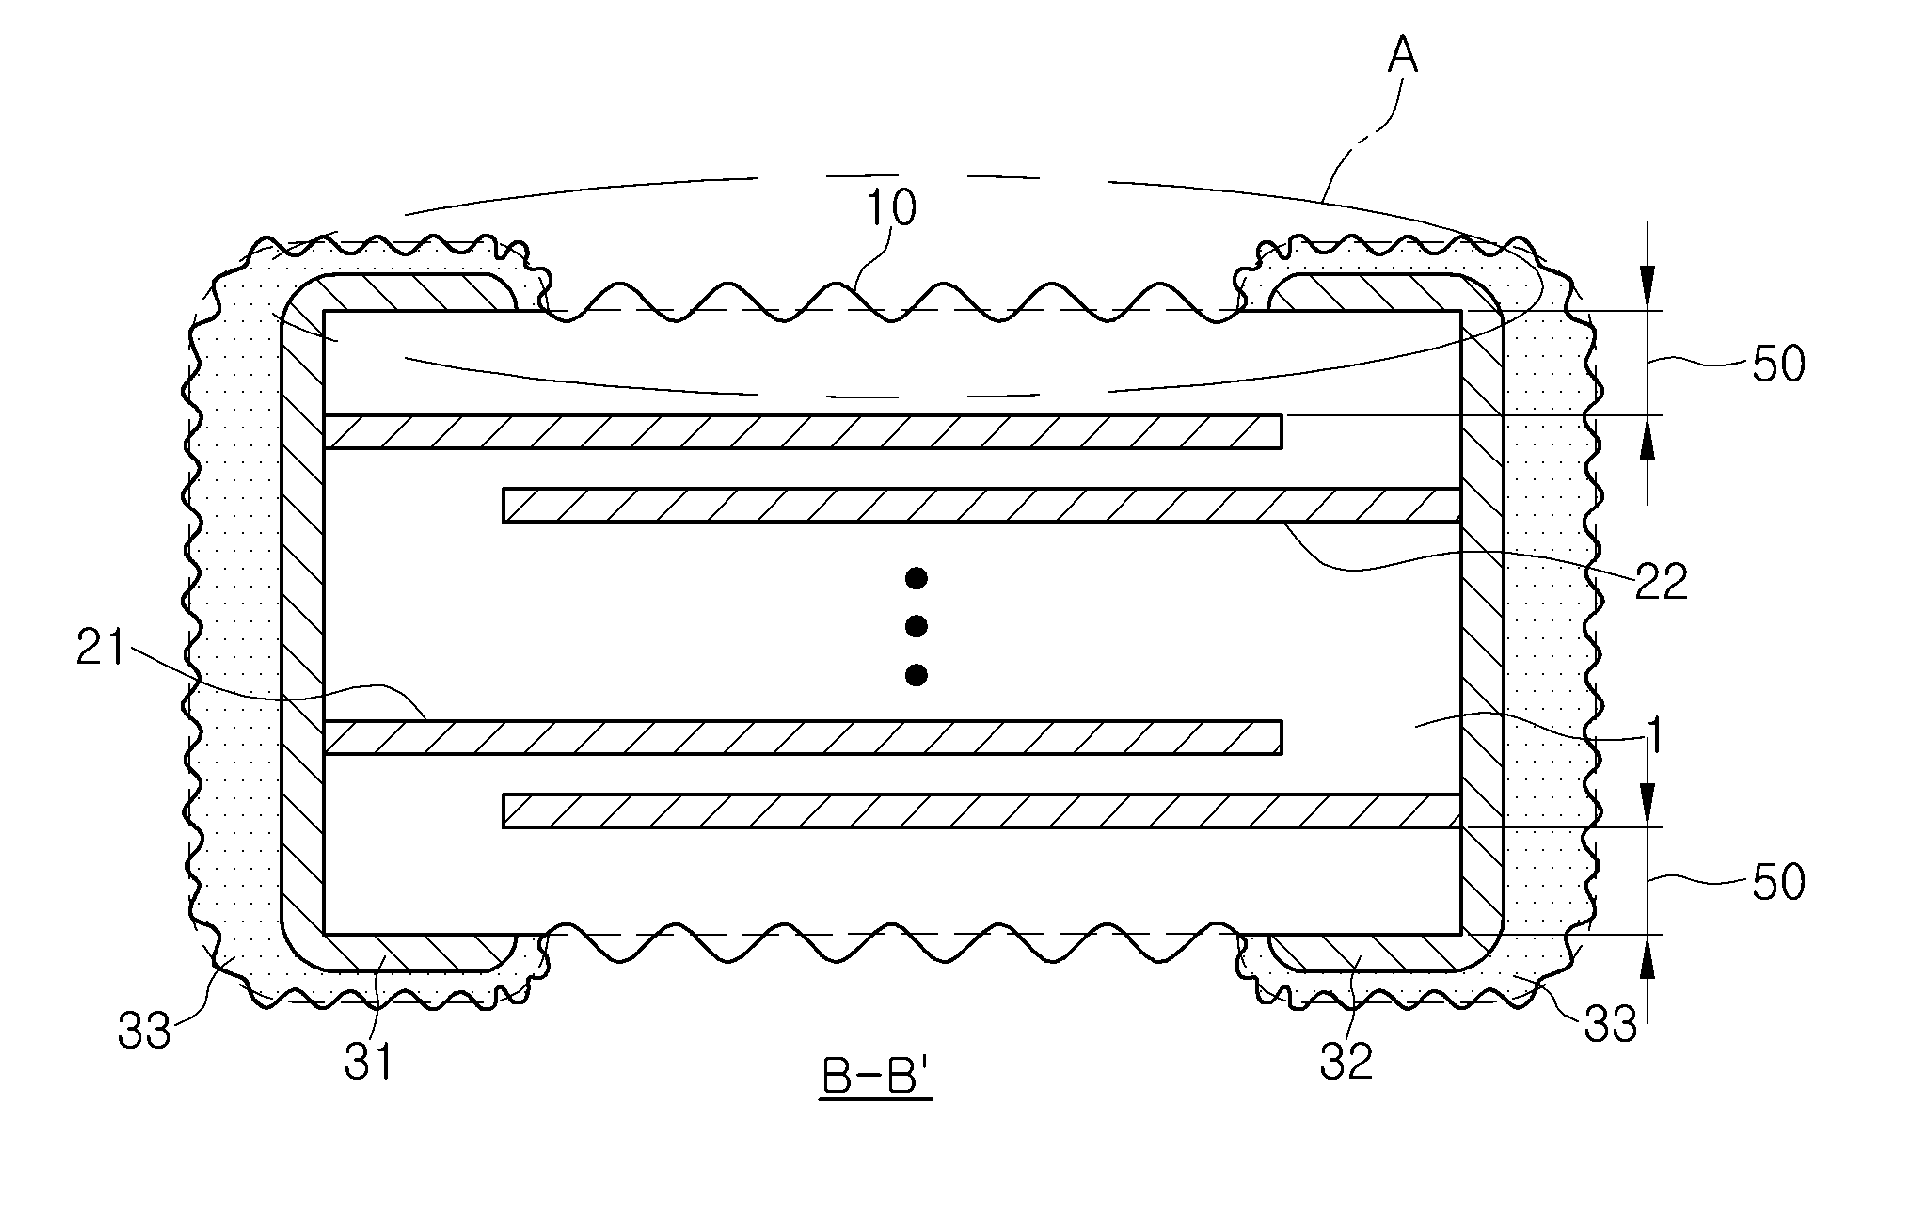 Embedded multilayer ceramic electronic component and method of manufacturing the same, and printed circuit board having embedded multilayer ceramic electronic component therein